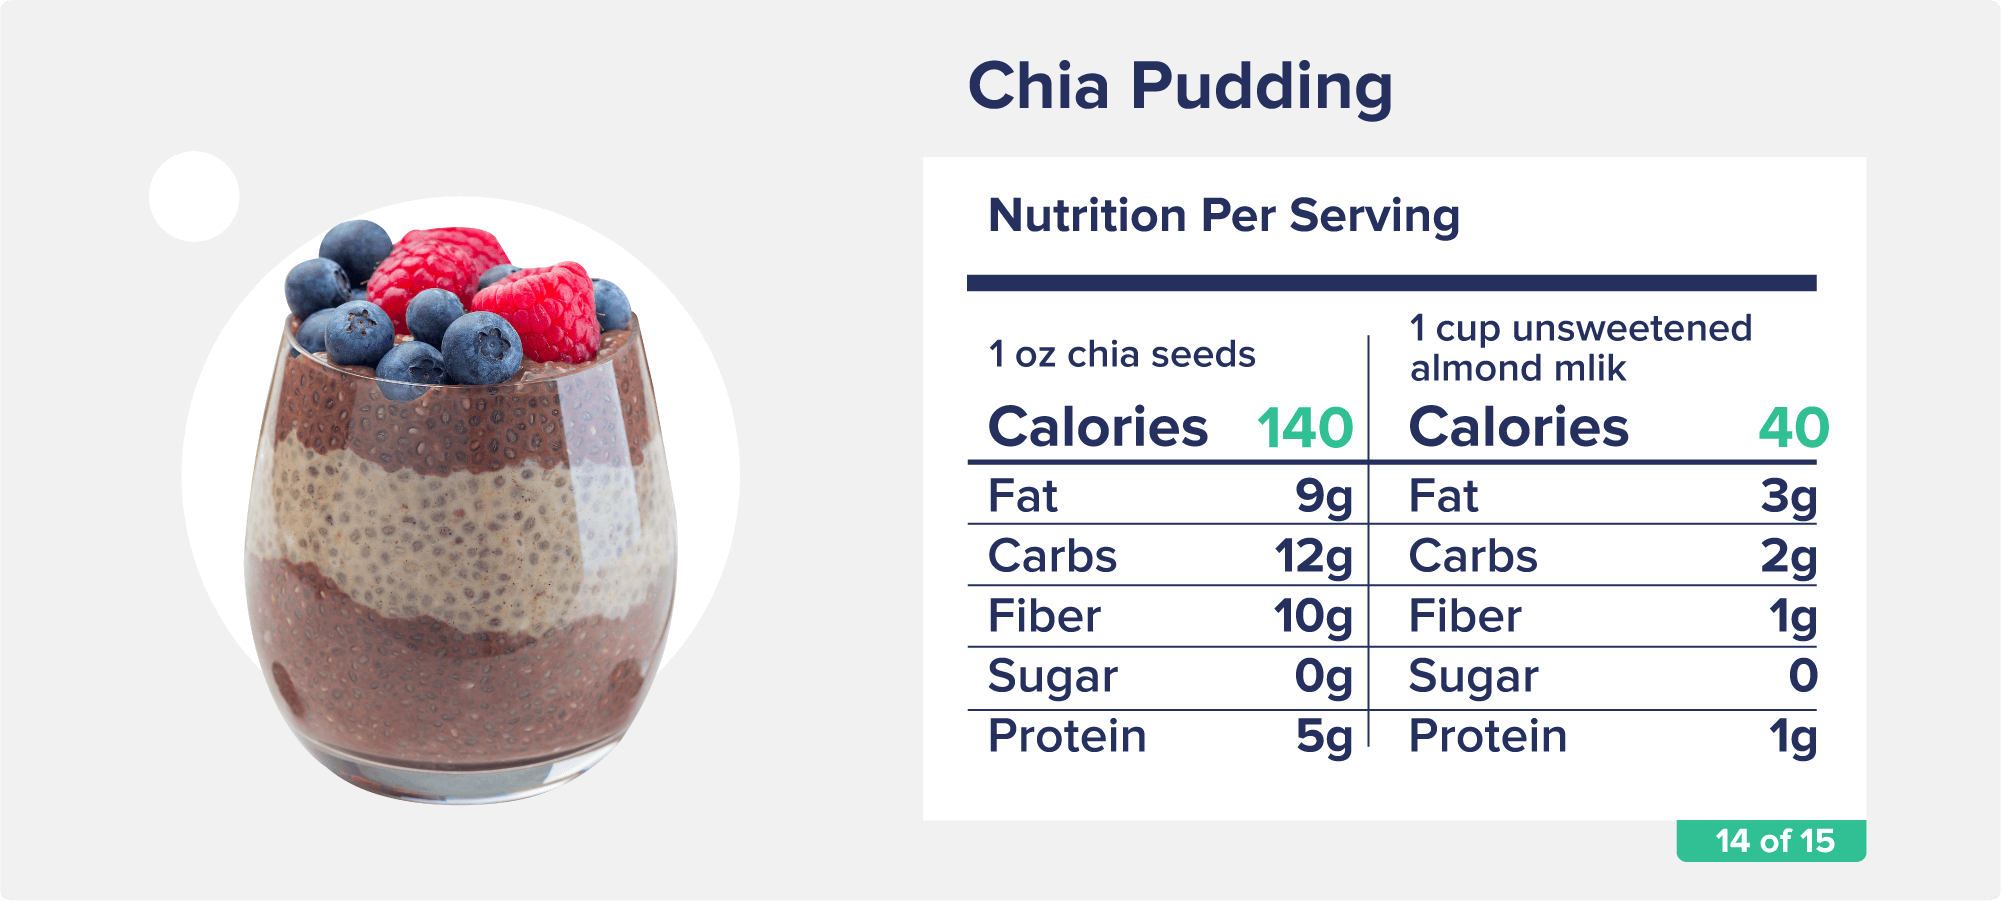 A stemless wine glass filled with chocolate chia pudding, topped with assorted berries, and pictured with accompanying nutrition facts like calories, fat, and protein.